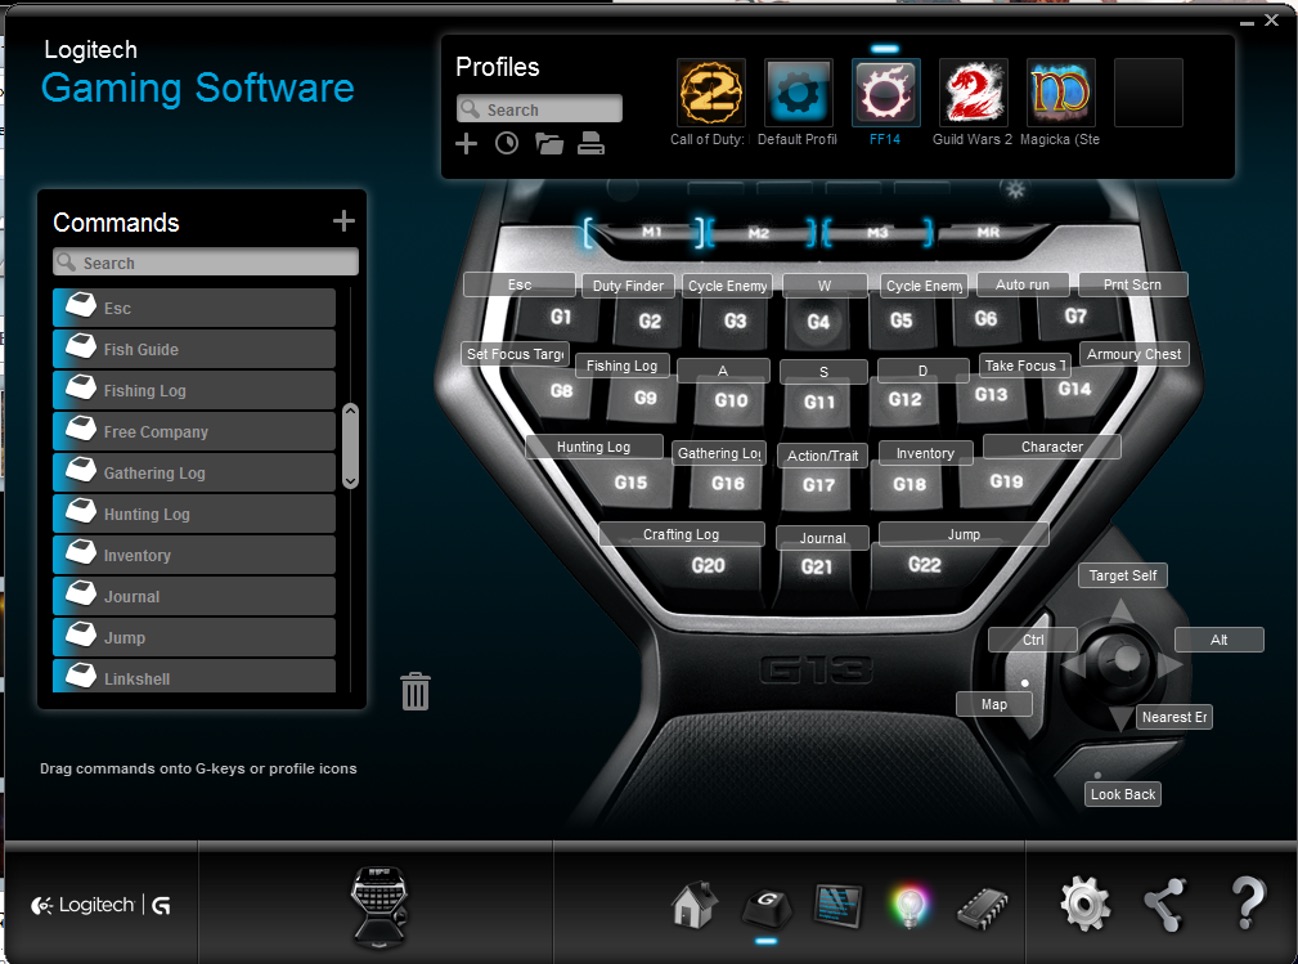 Where Is The Logitech Gaming Keyboard Profile For Final Fantasy XIV